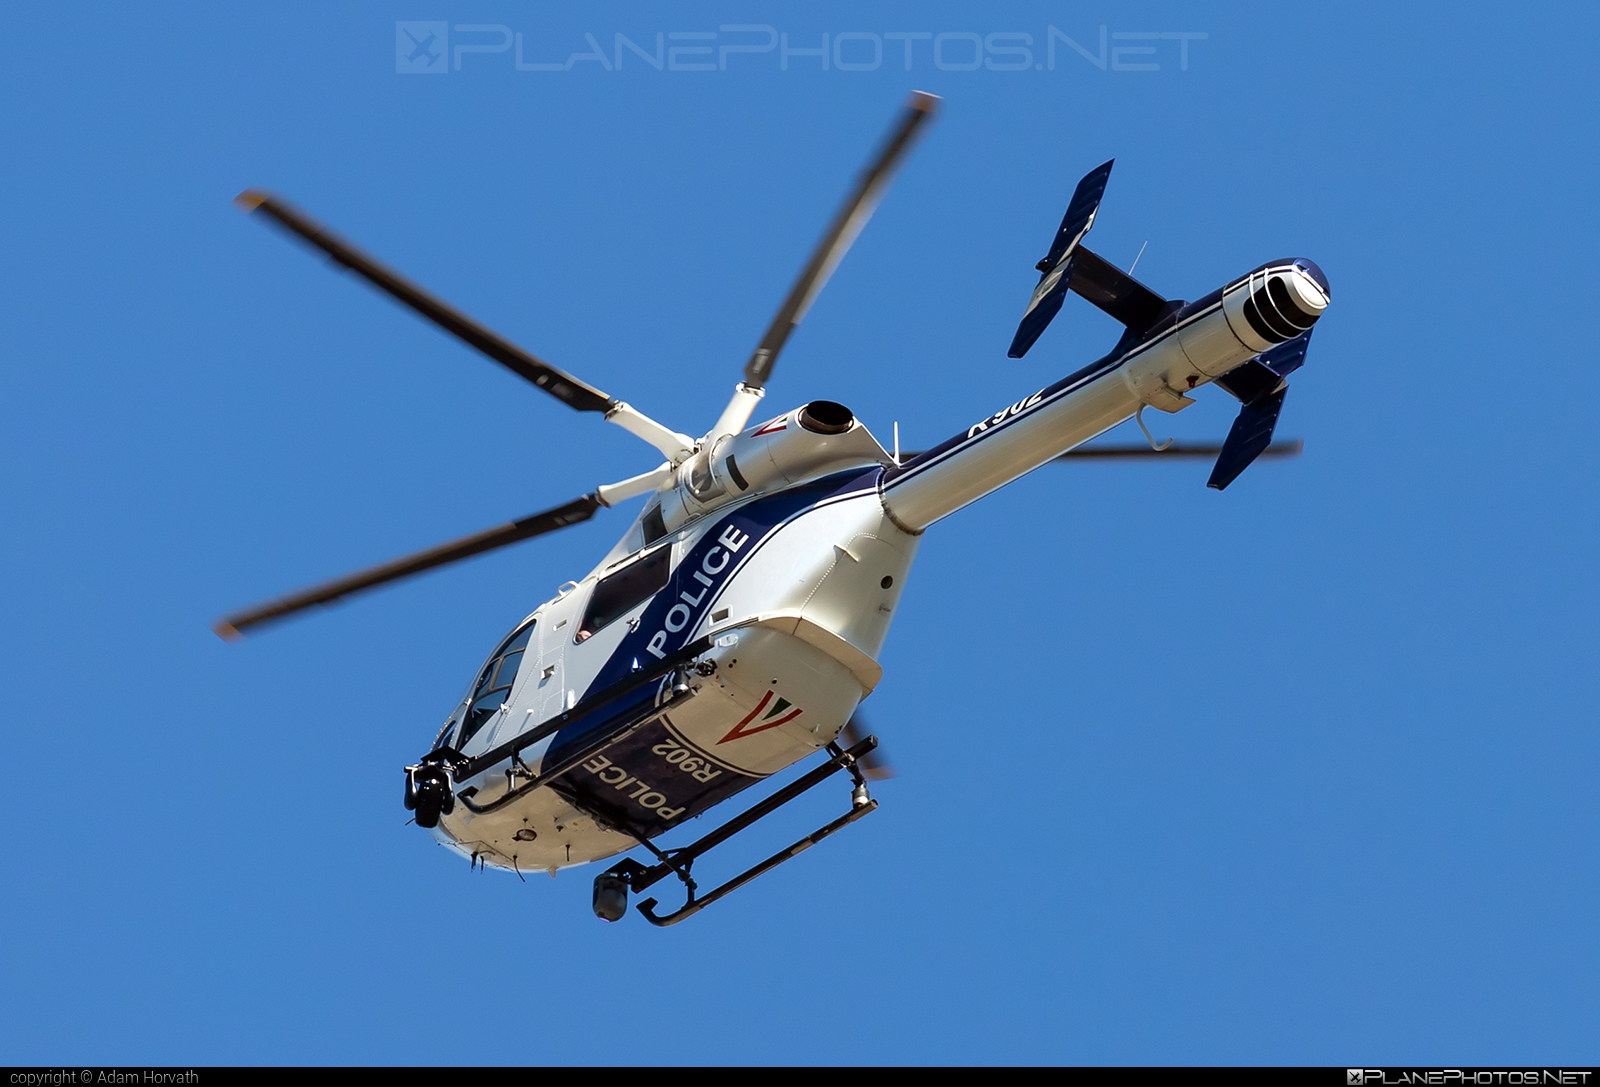 MD Helicopters MD-902 Explorer - R902 operated by Rendőrség (Hungarian Police) #hungarianpolice #mdhelicopters #rendorseg